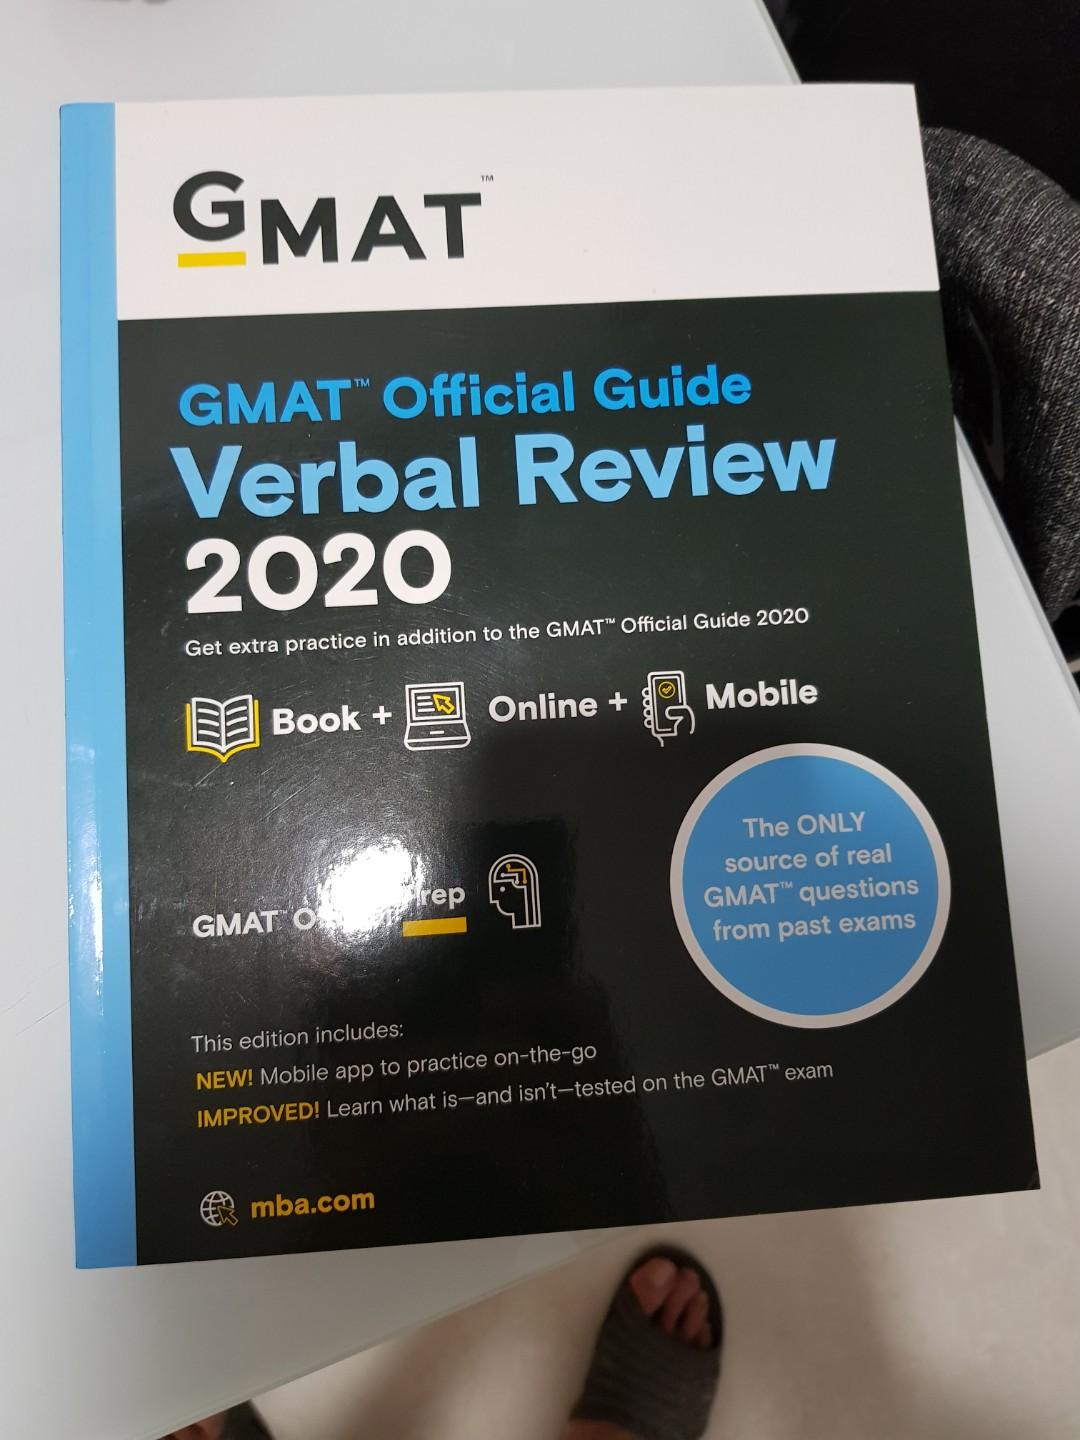 GMAT Official Guide Verbal Review 2020, Hobbies & Toys, Books